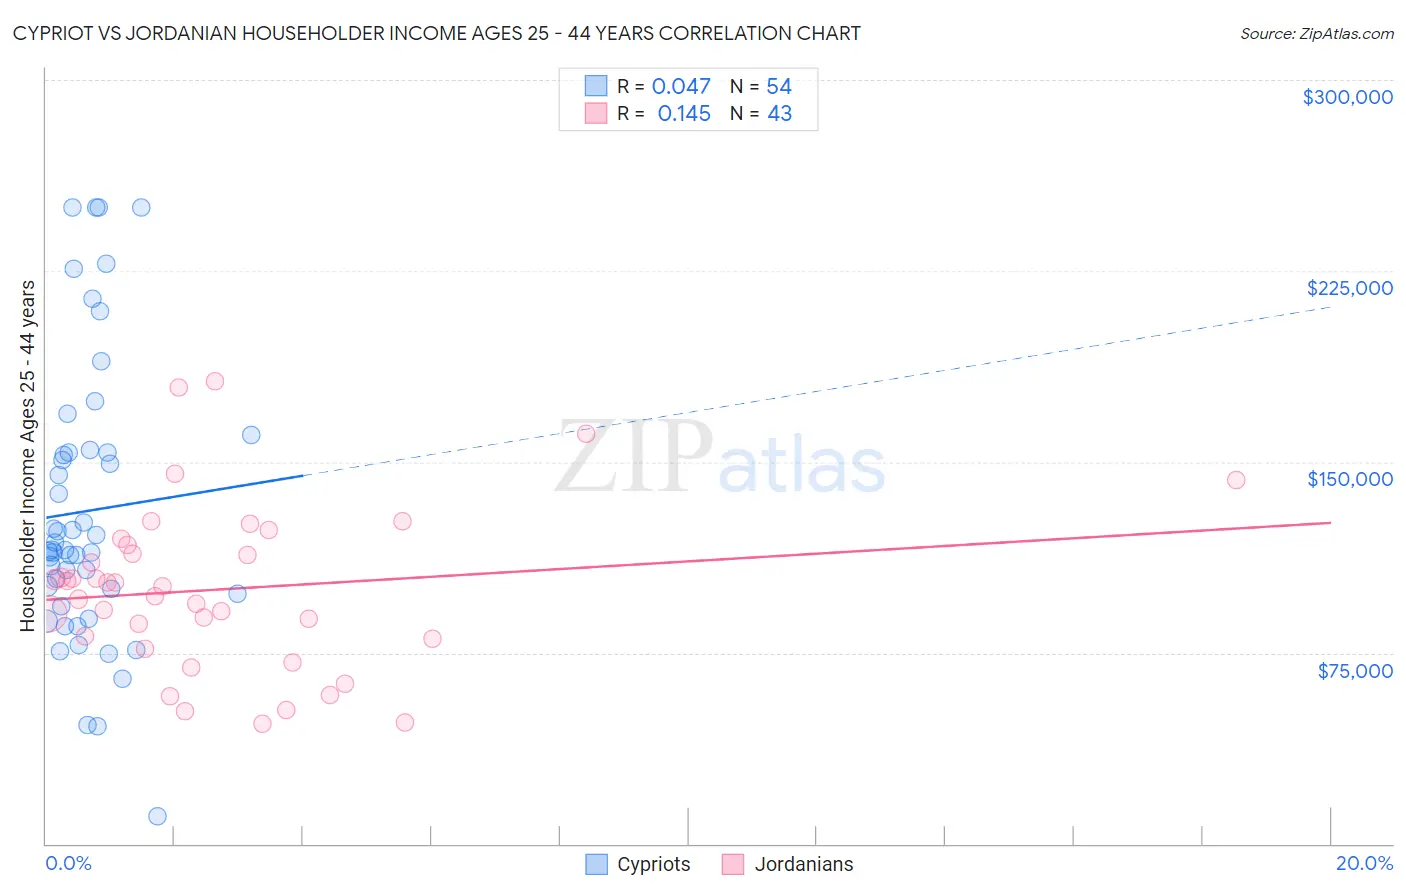 Cypriot vs Jordanian Householder Income Ages 25 - 44 years